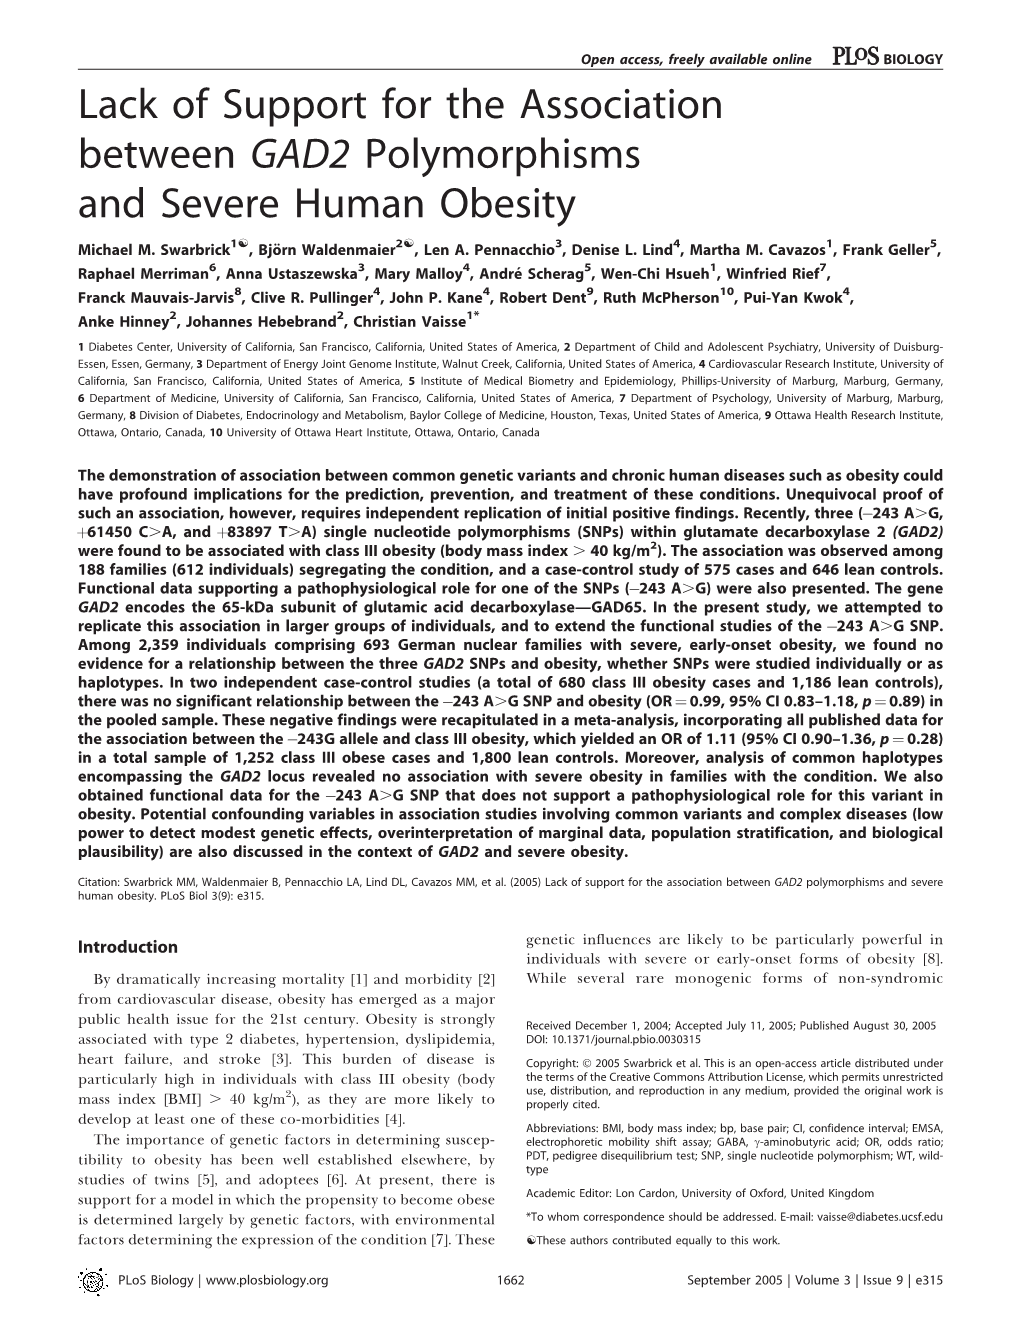 Lack of Support for the Association Between GAD2 Polymorphisms and Severe Human Obesity